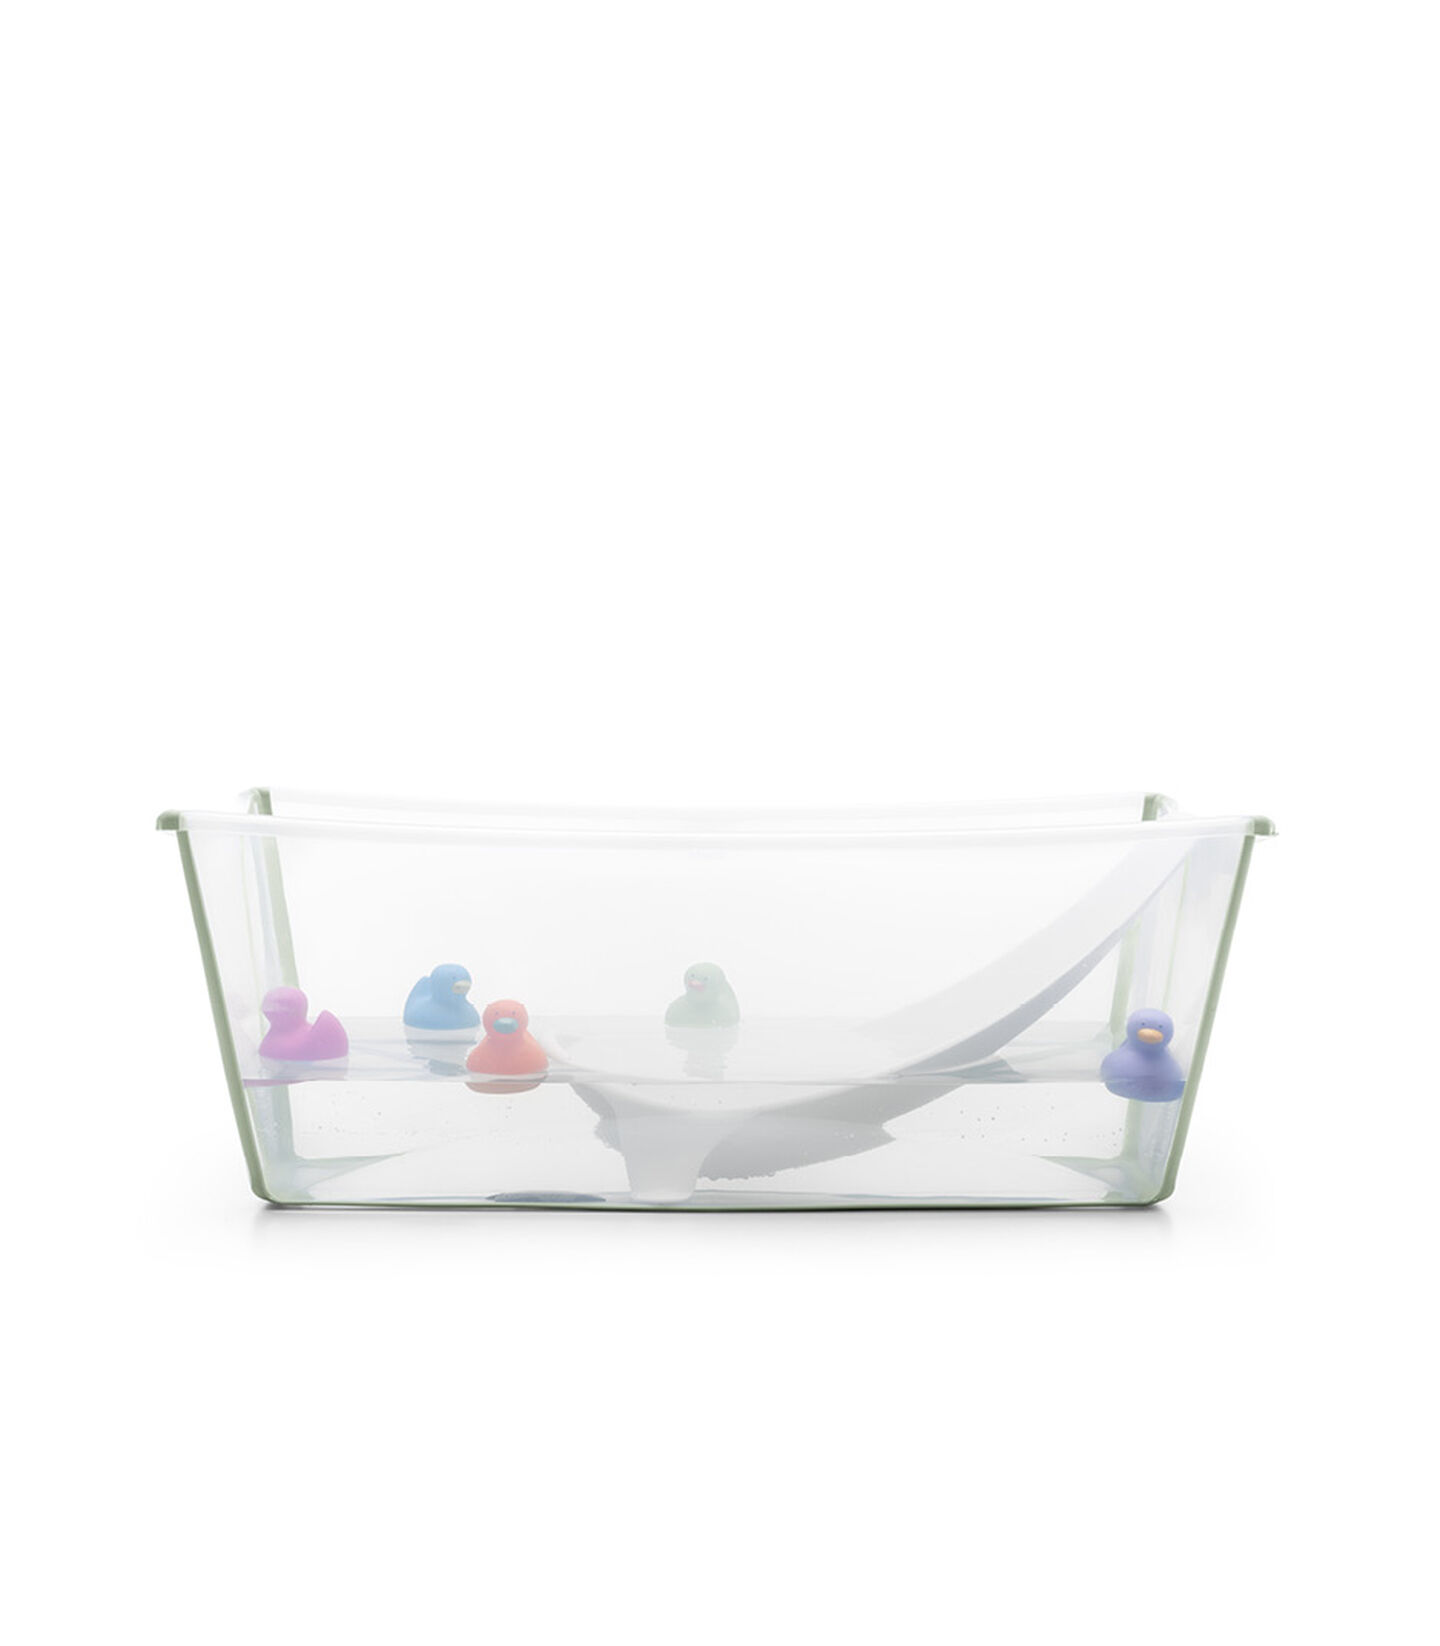 Bath tub, Transparent Green. Accessorised with baby toys. view 8